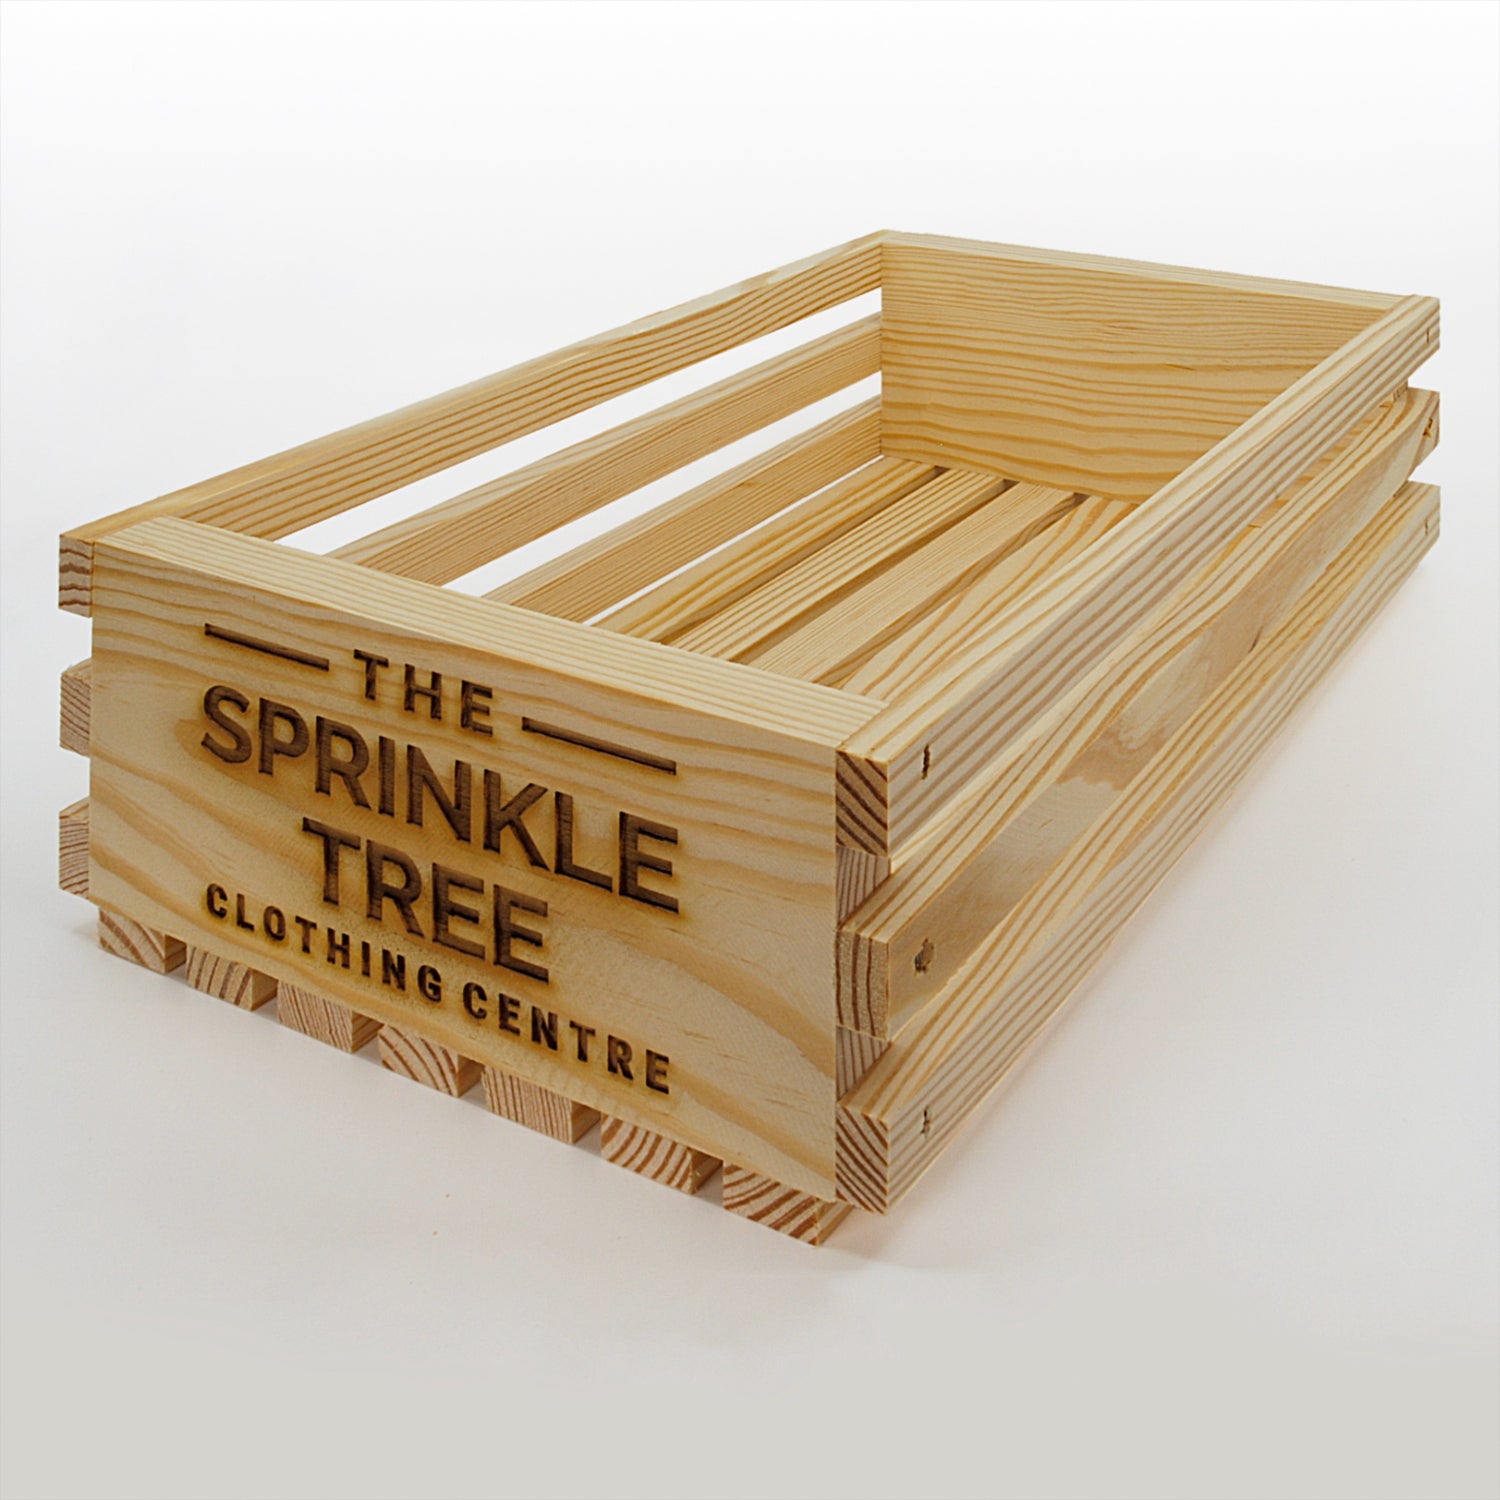 12 inch wooden gift crate with custom branded image by Carpenter Core